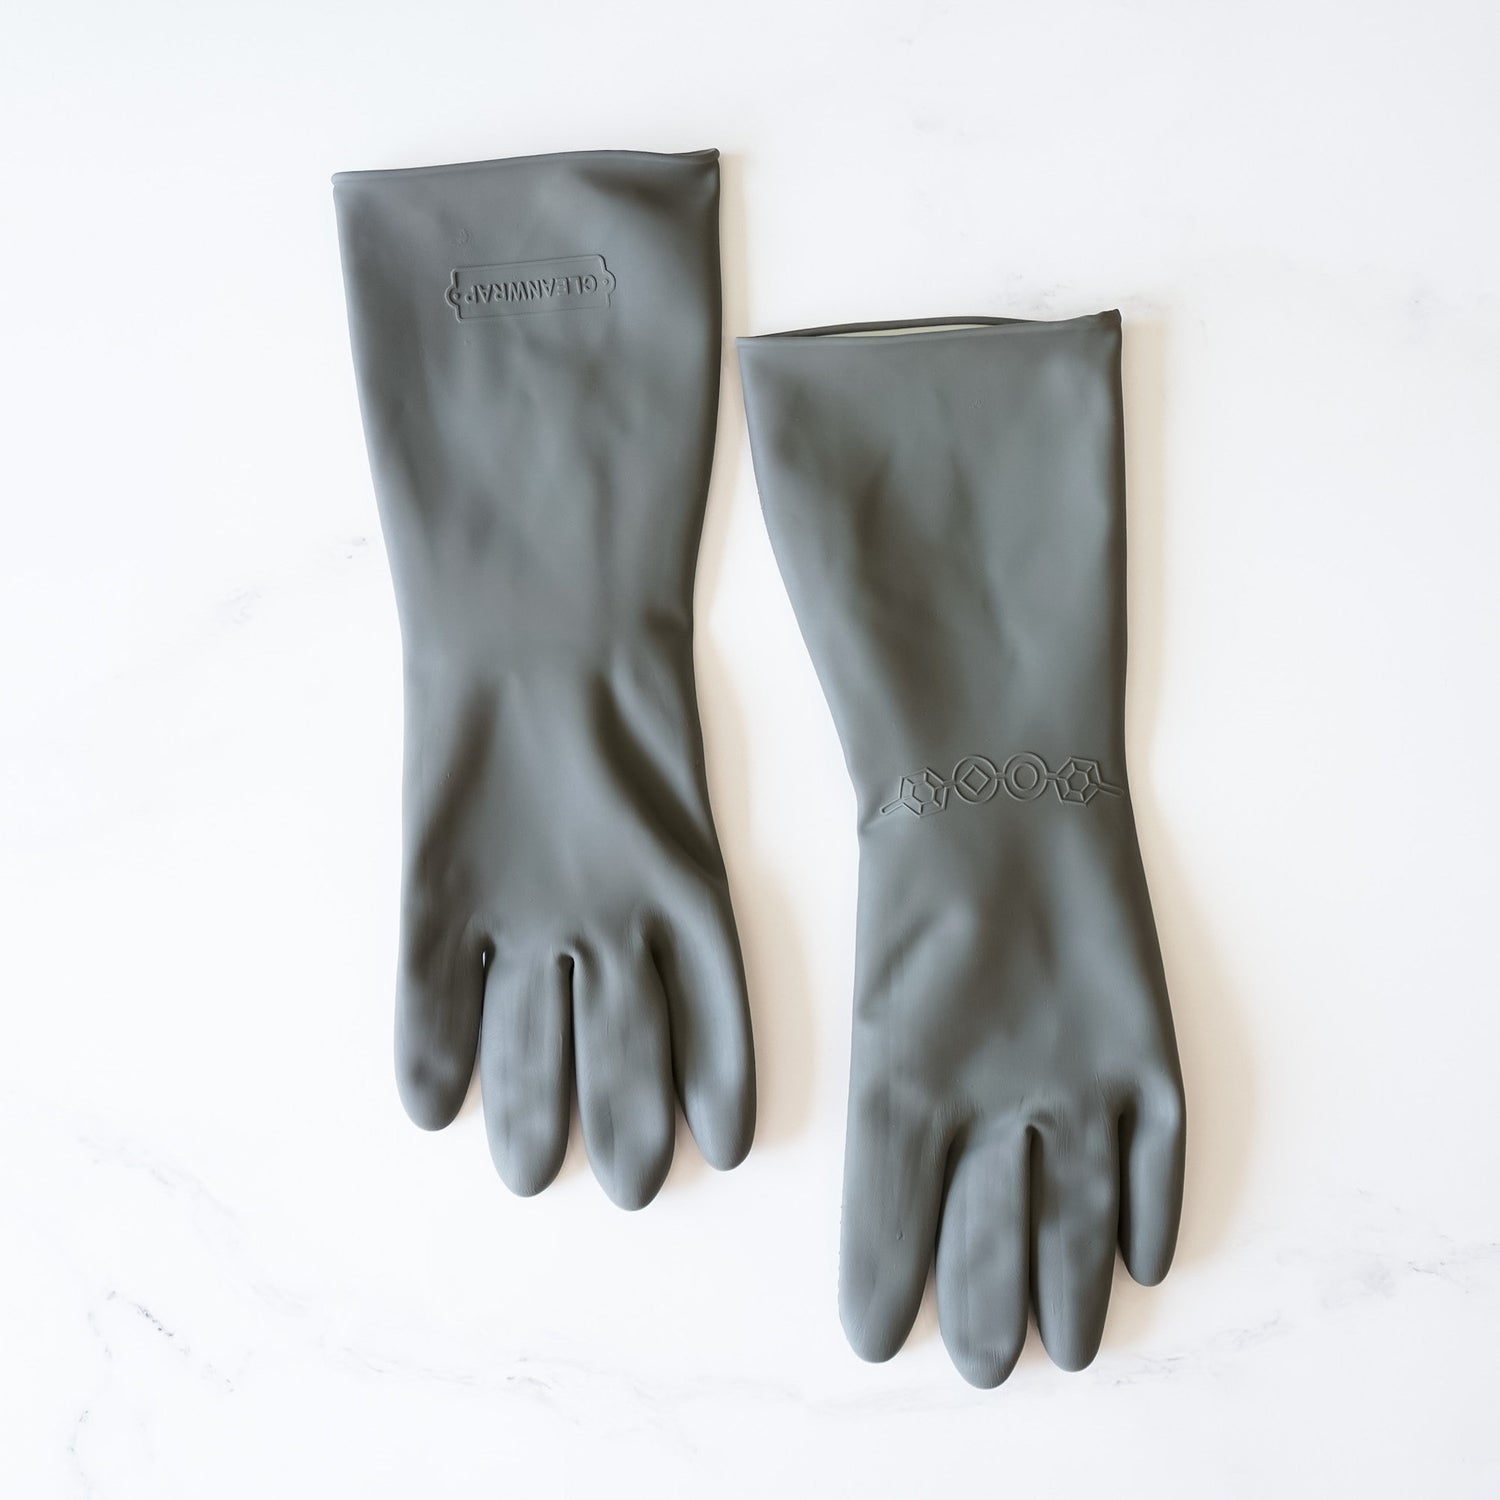 rubber gloves in gray